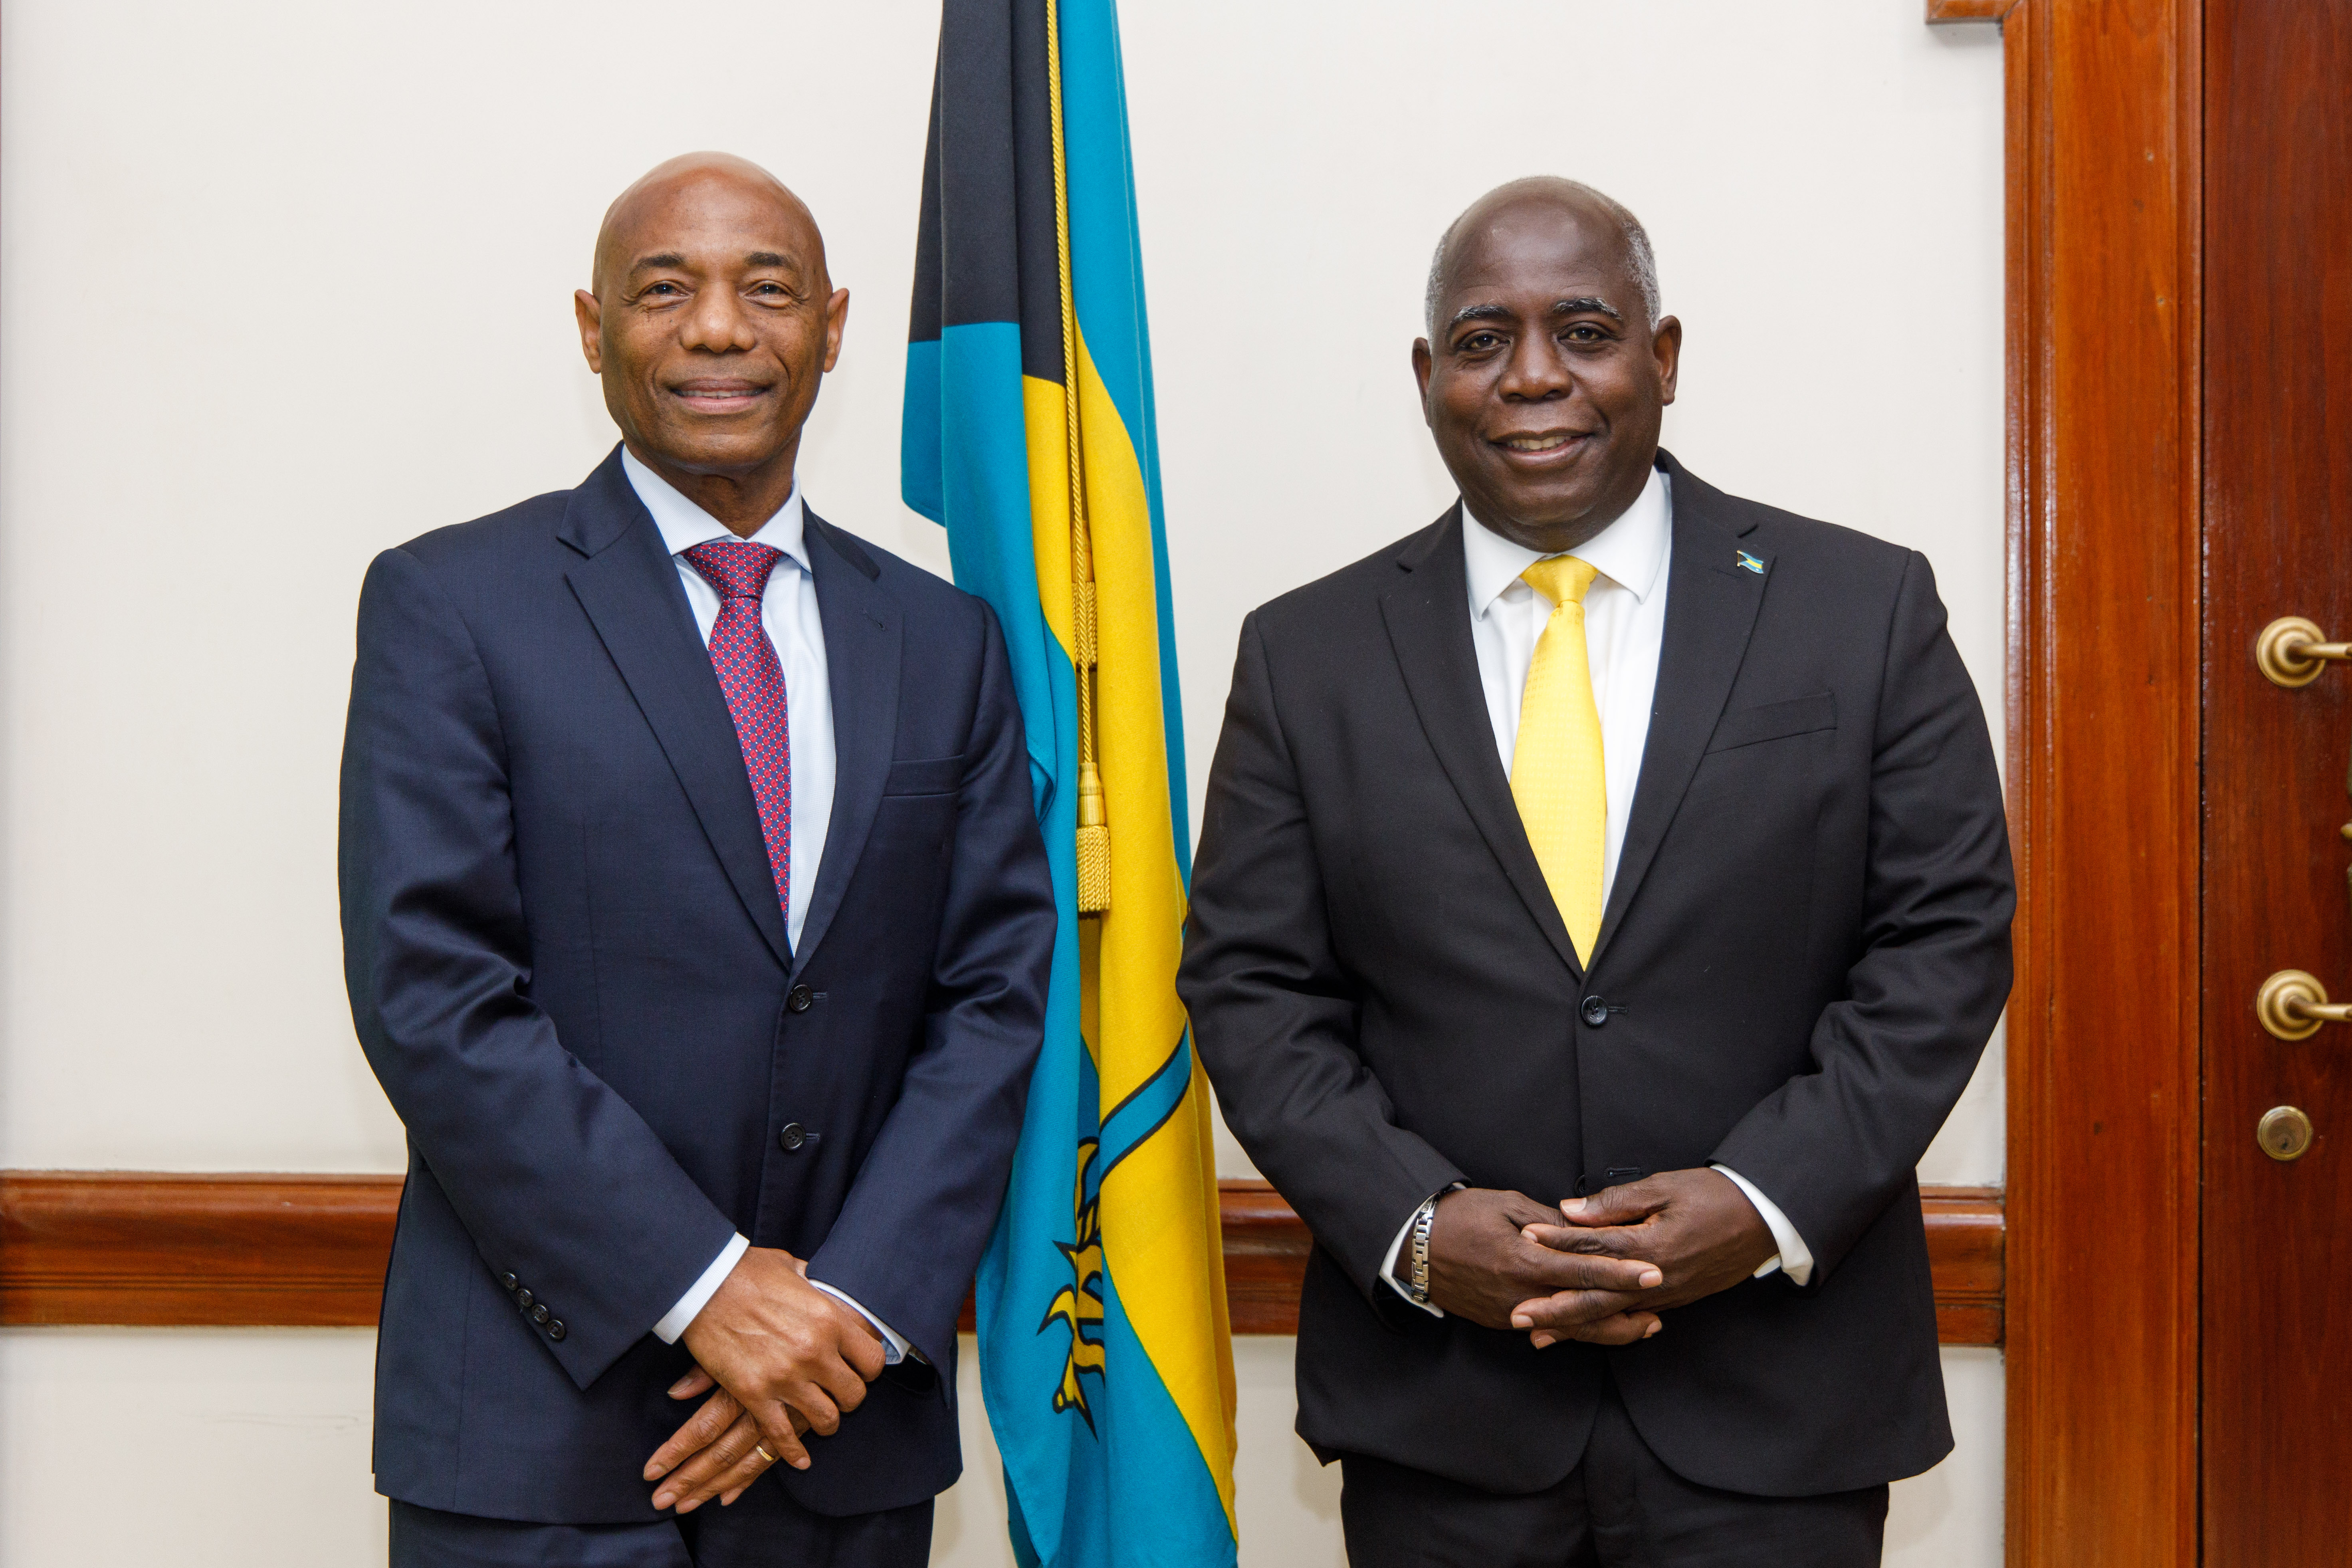 Dr. Gene Leon and the Honourable Philip Davis stand in front of The Bahamas flag